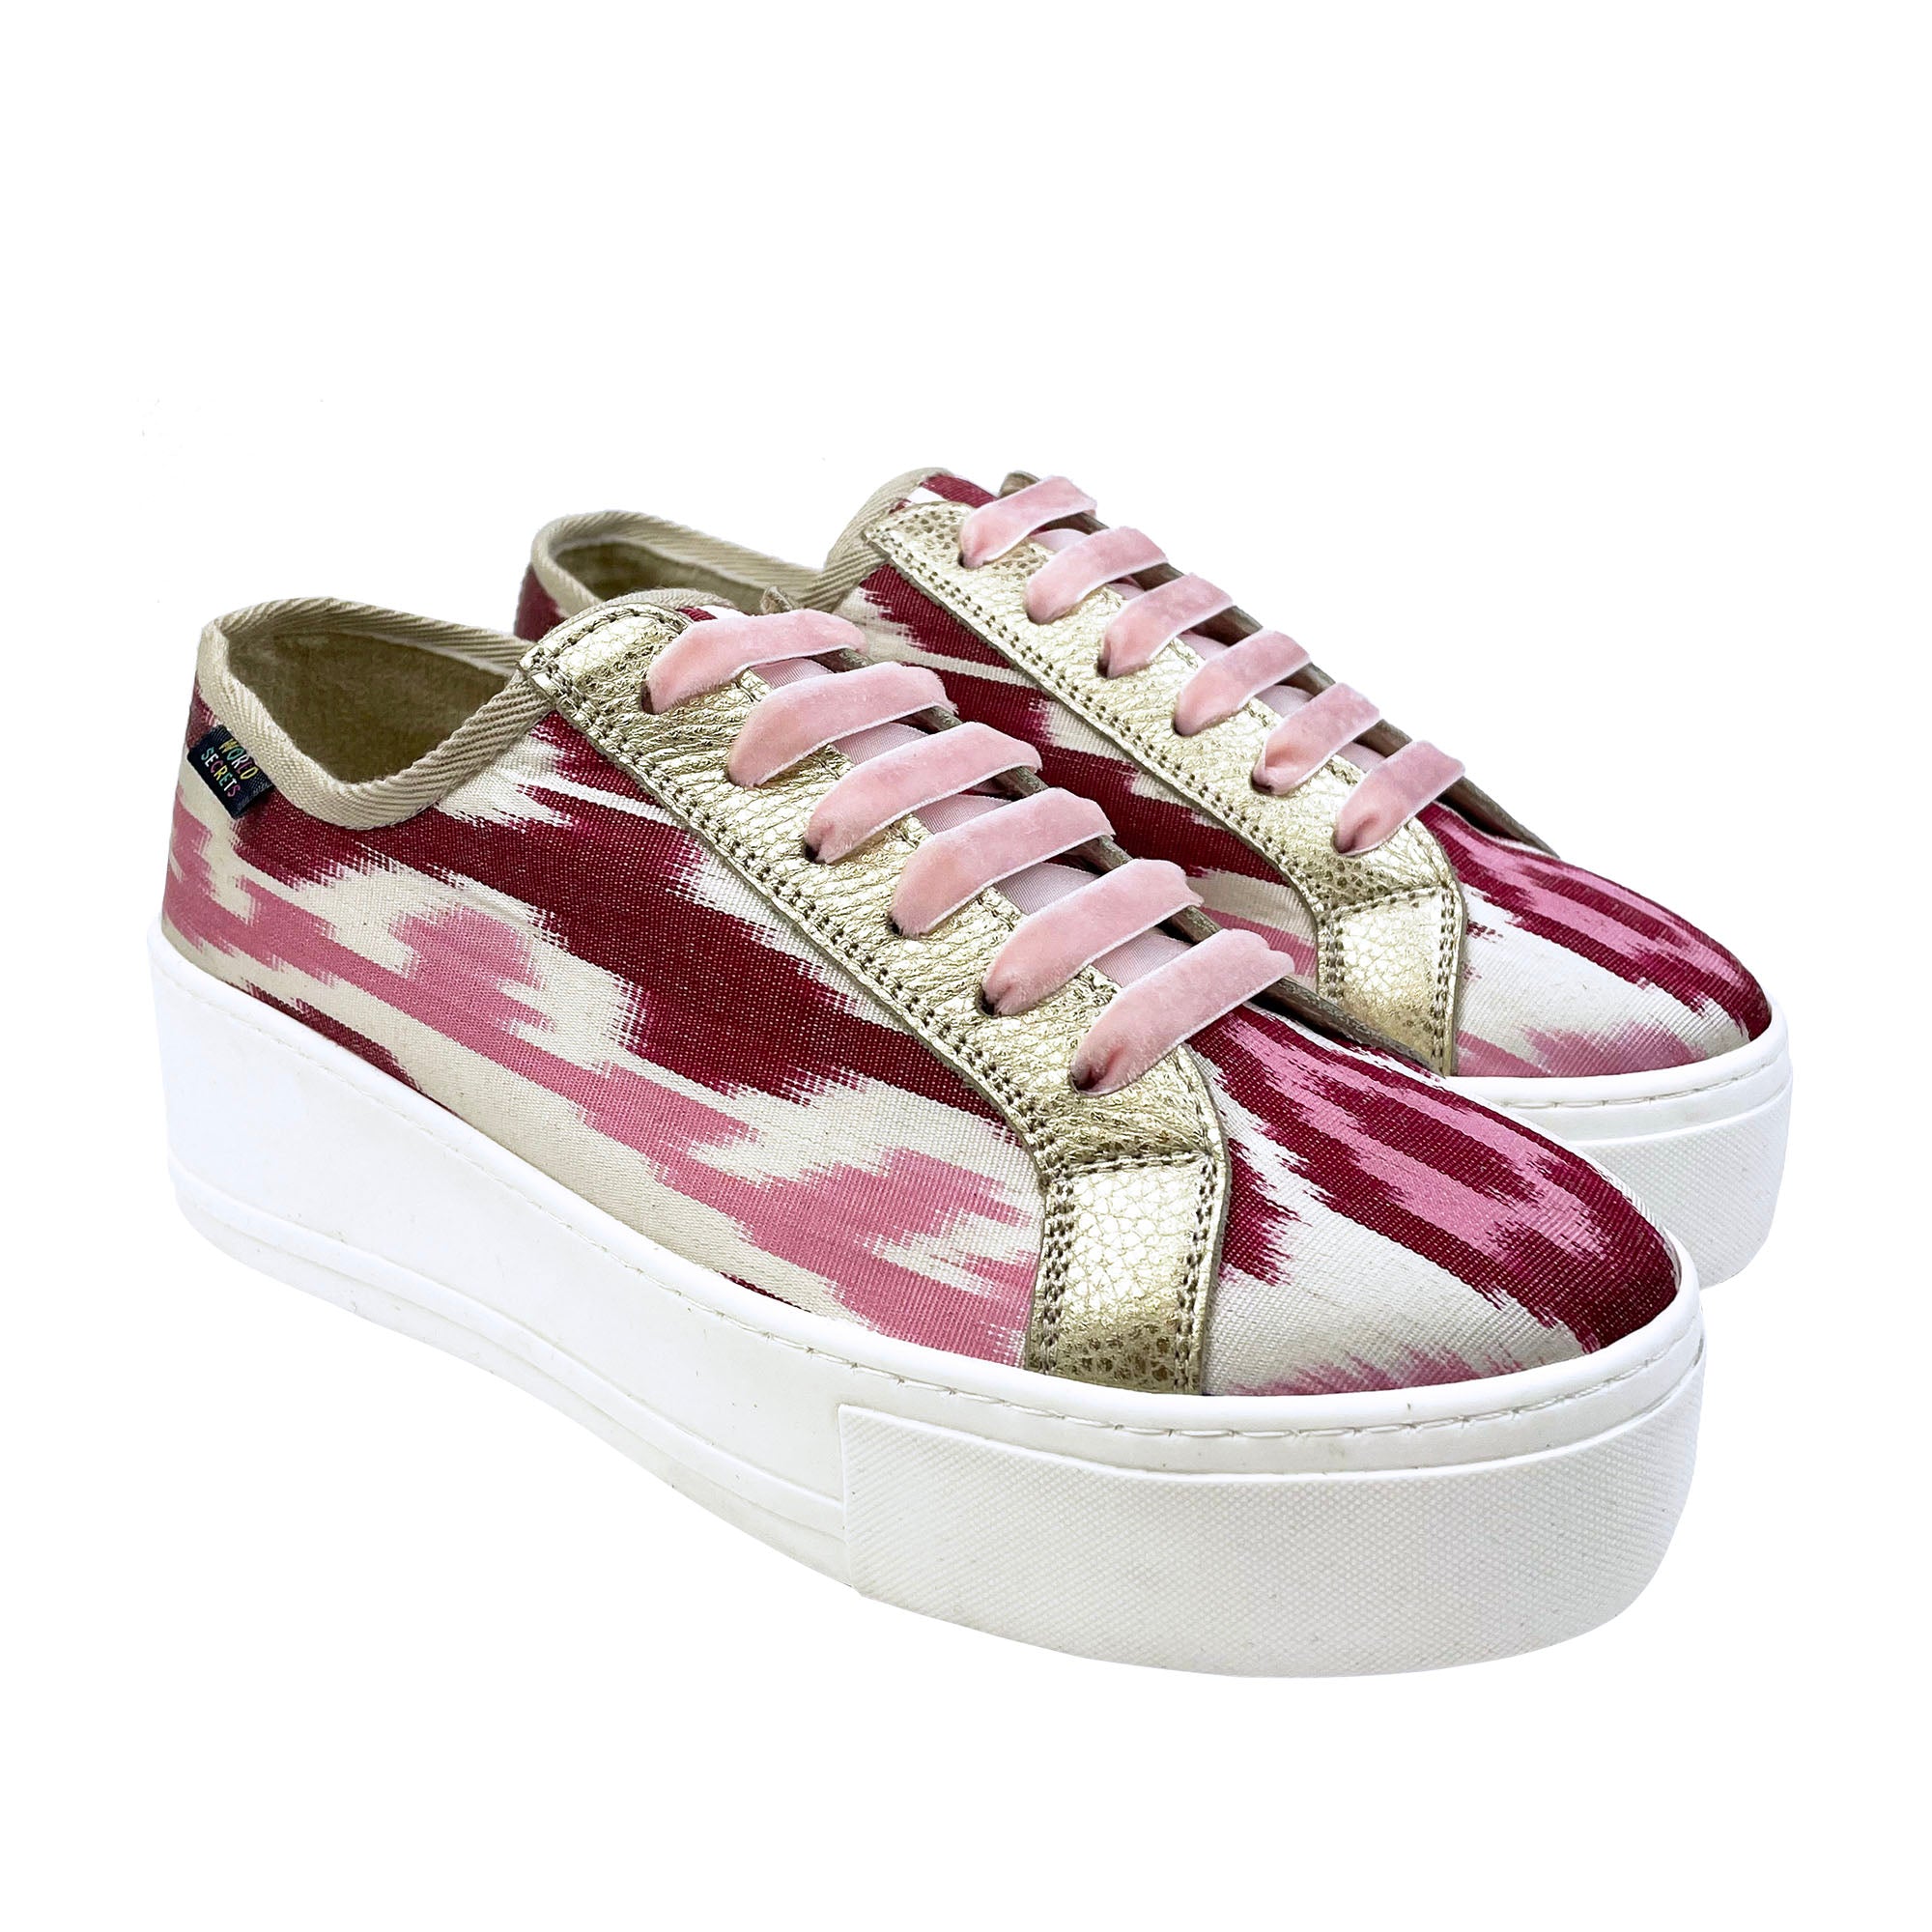 Pink, red and white Ikat silk platform sneakers with gold metallic leather and pale pink velvet laces